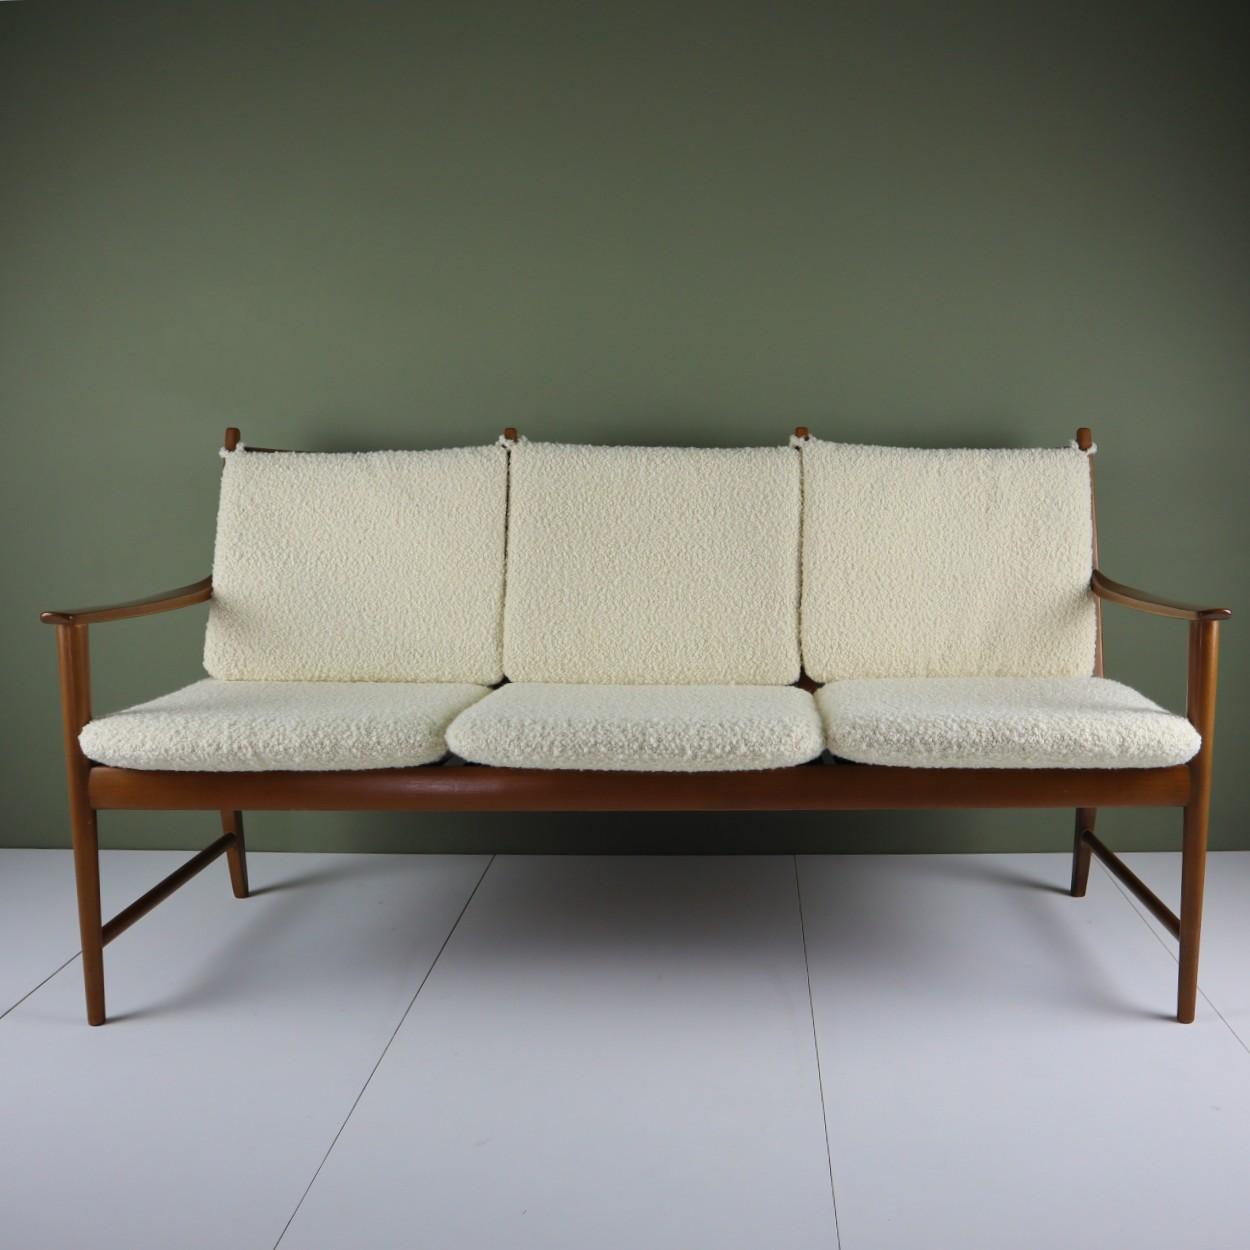 Midcentury sofa in beechwood, reupholstered with an Italian-made off-white bouclé fabric from Designers Guild’s Lana collection.

This sofa was bought at an auction in June of 2021. Its design is a perfect blend of early 20th and midcentury